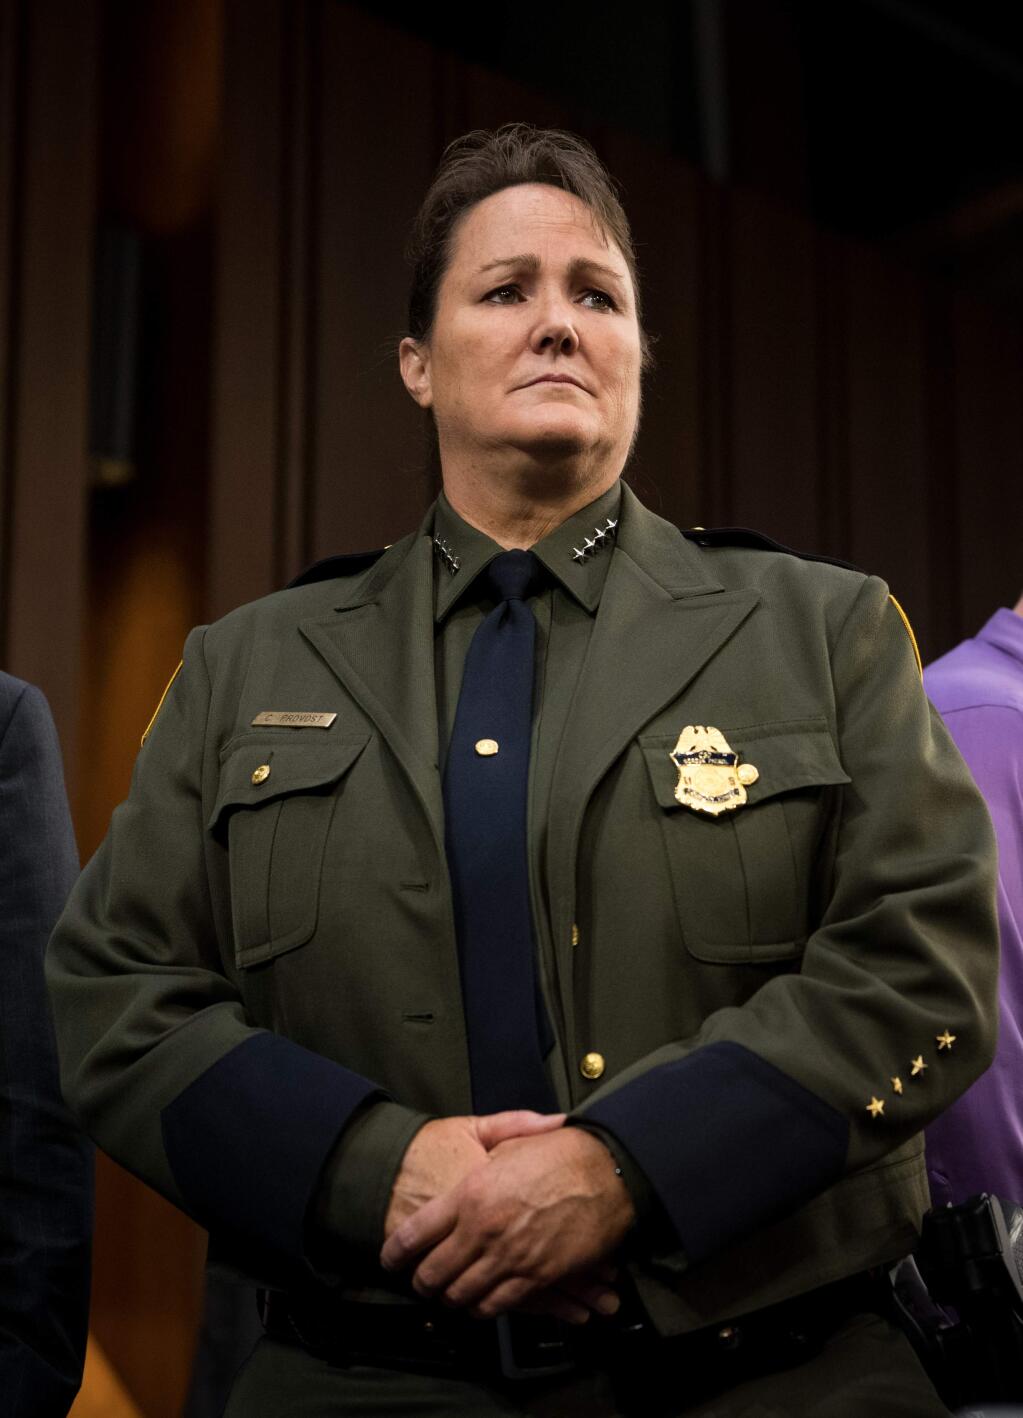 FILE -- Carla Provost, acting chief of U.S. Border Patrol, waits before a Senate Judiciary hearing on oversight of immigration enforcement and family reunification efforts, on Capitol Hill in Washington, July 31, 2018. Provost, who was appointed acting chief of the Border Patrol in 2017, will become the first woman to lead the Border Patrol in its 94-year history. (Erin Schaff/The New York Times)